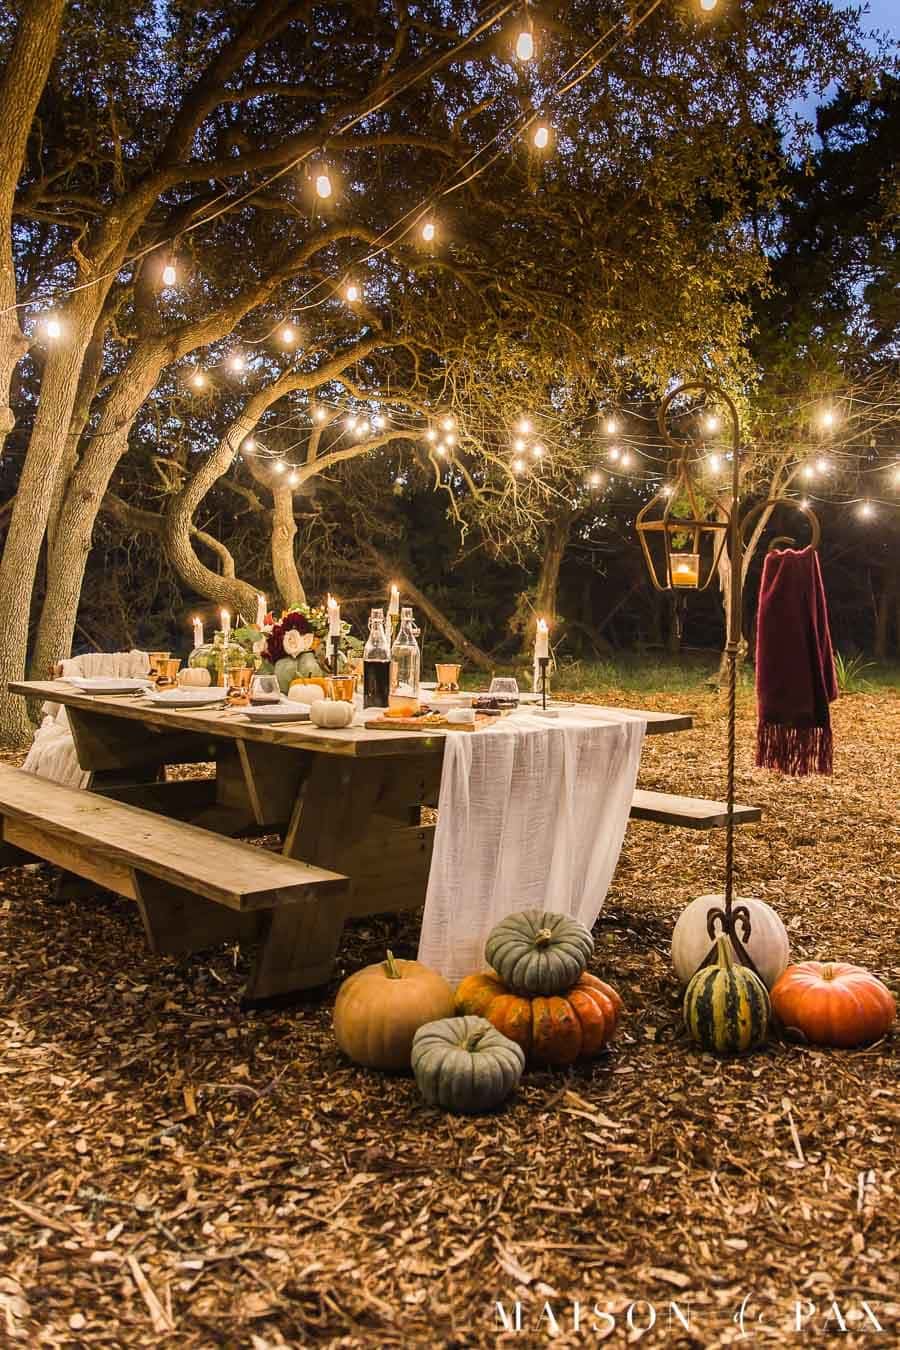 Thanksgiving Decorating Ideas Festive Ways to Decorate Your Home for Thanksgiving